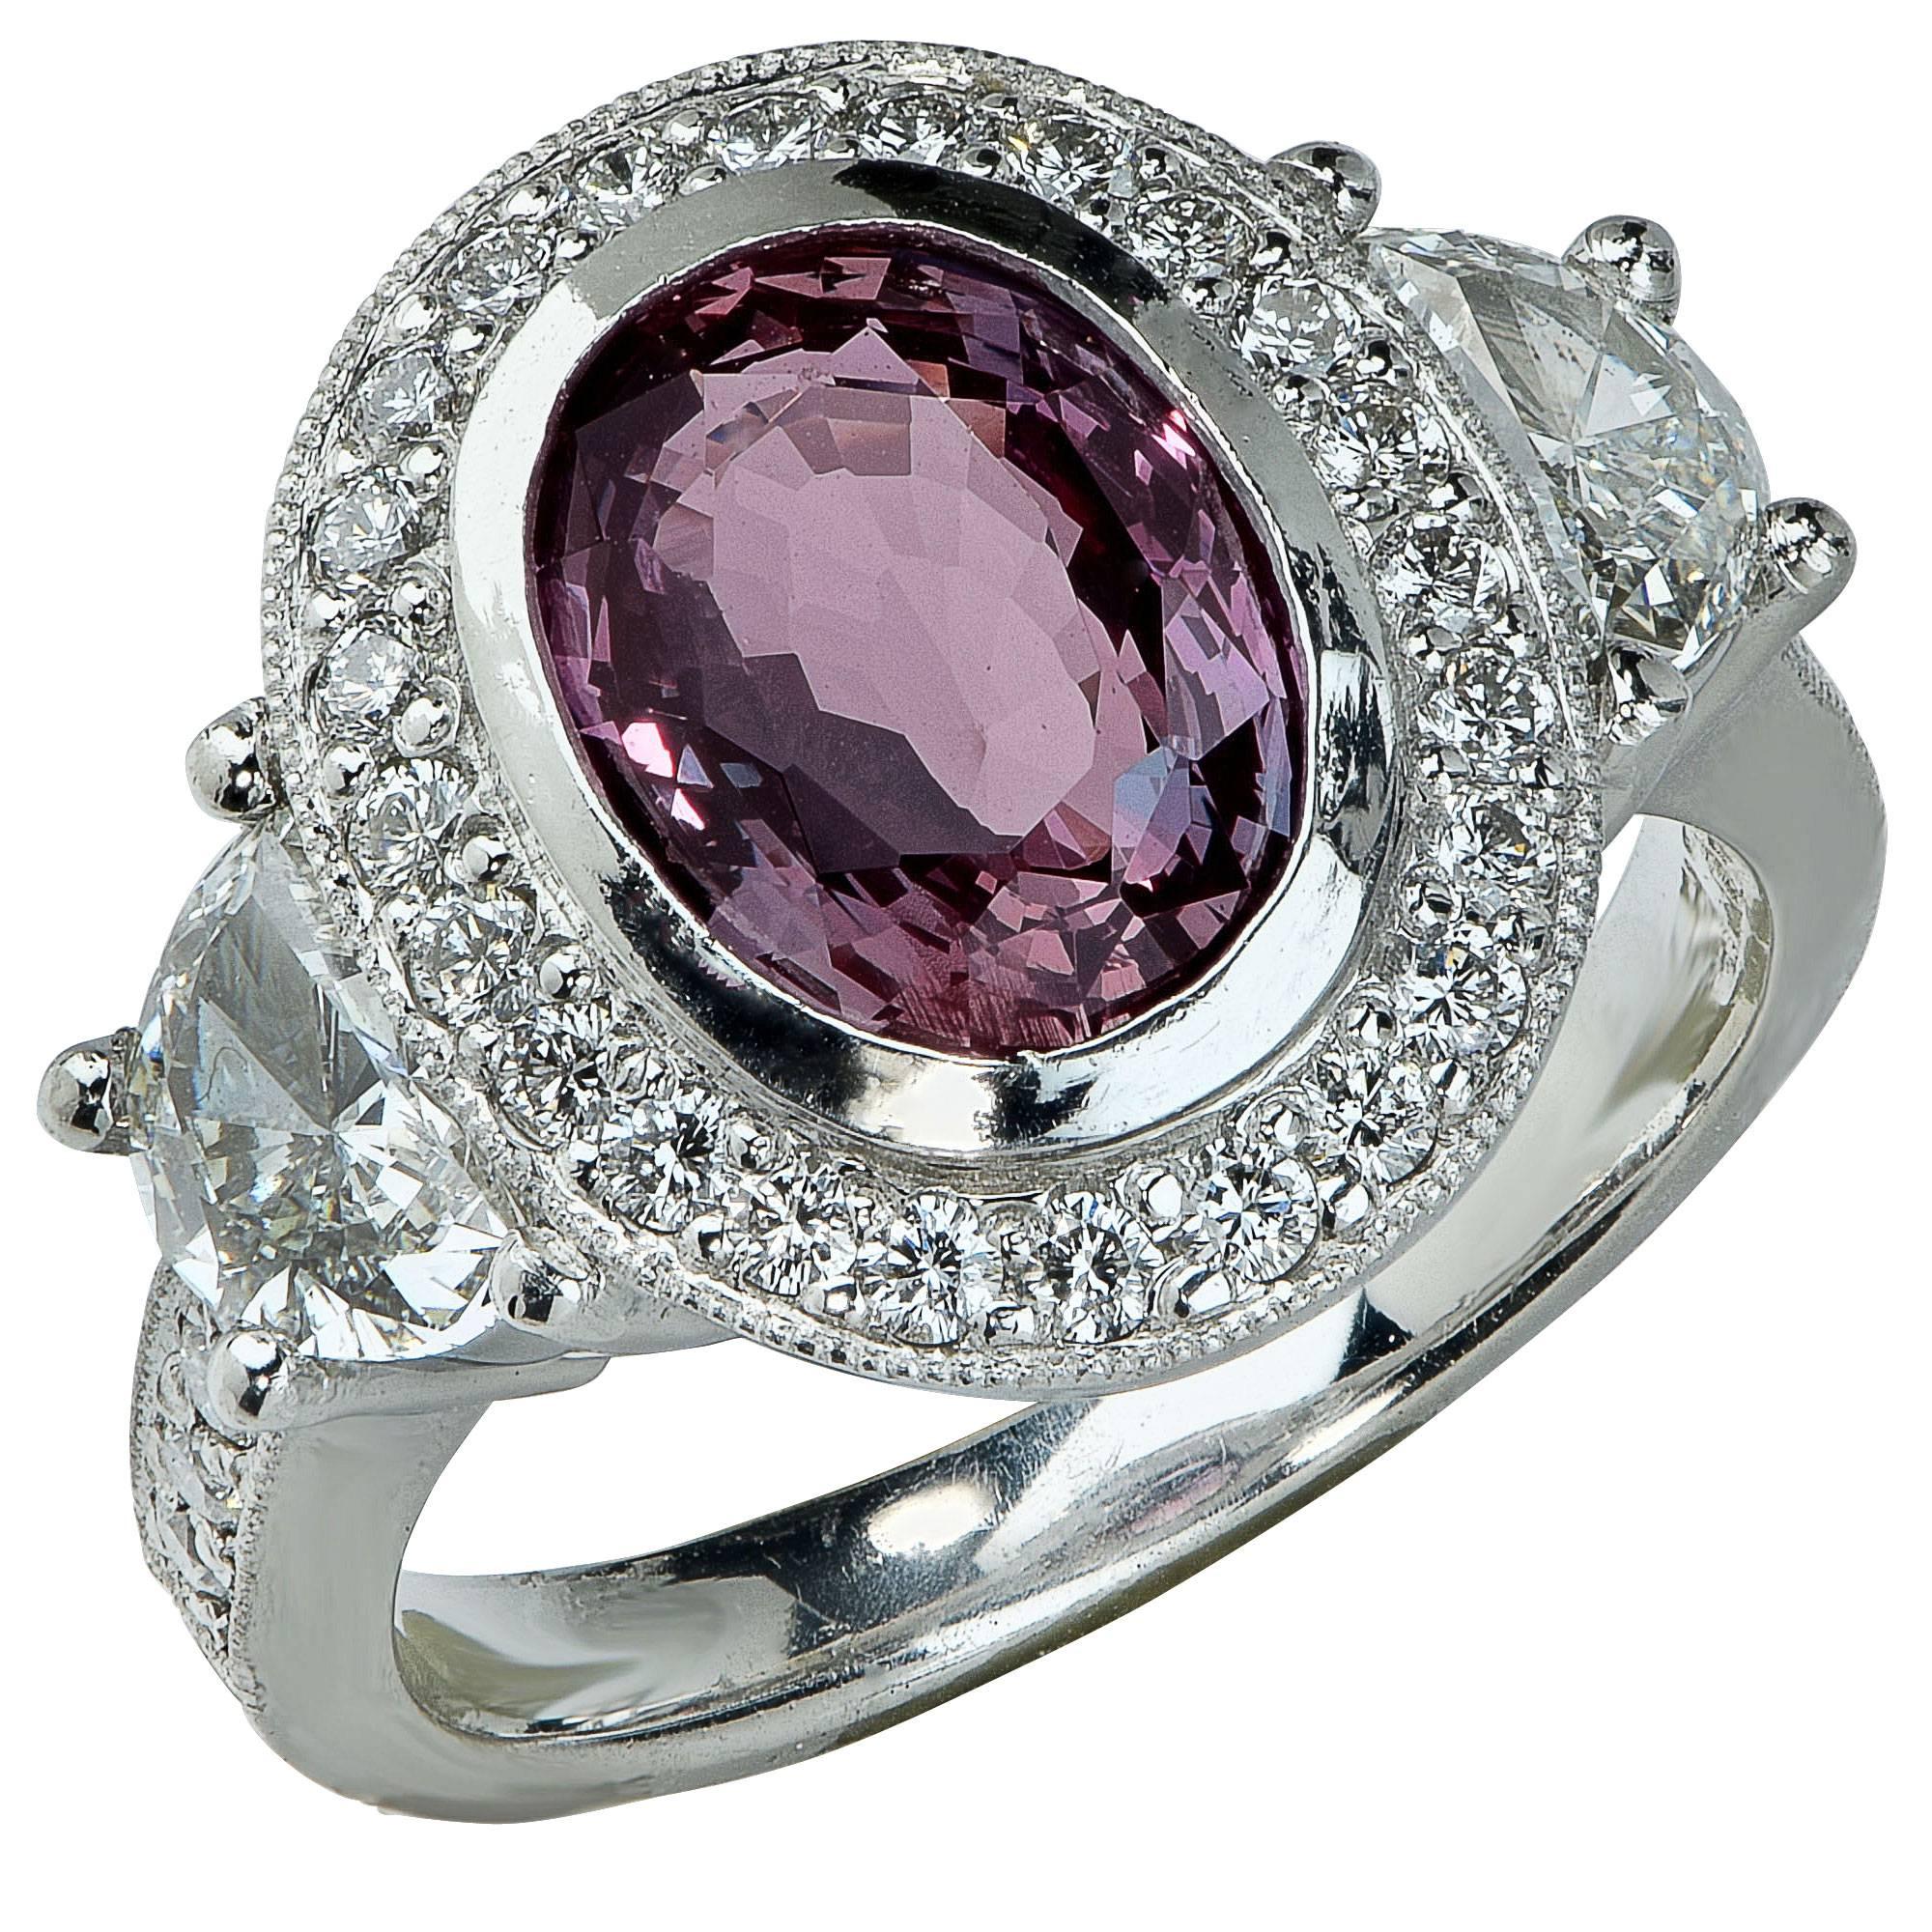 Platinum Ring Set with 2.88ct Alexandrite Flanked by 2 Half Moon Shaped Diamonds Weighing Approximately .84cts Surrounded by 32 Round Brilliant Diamonds Weighing Approximately .50cts.